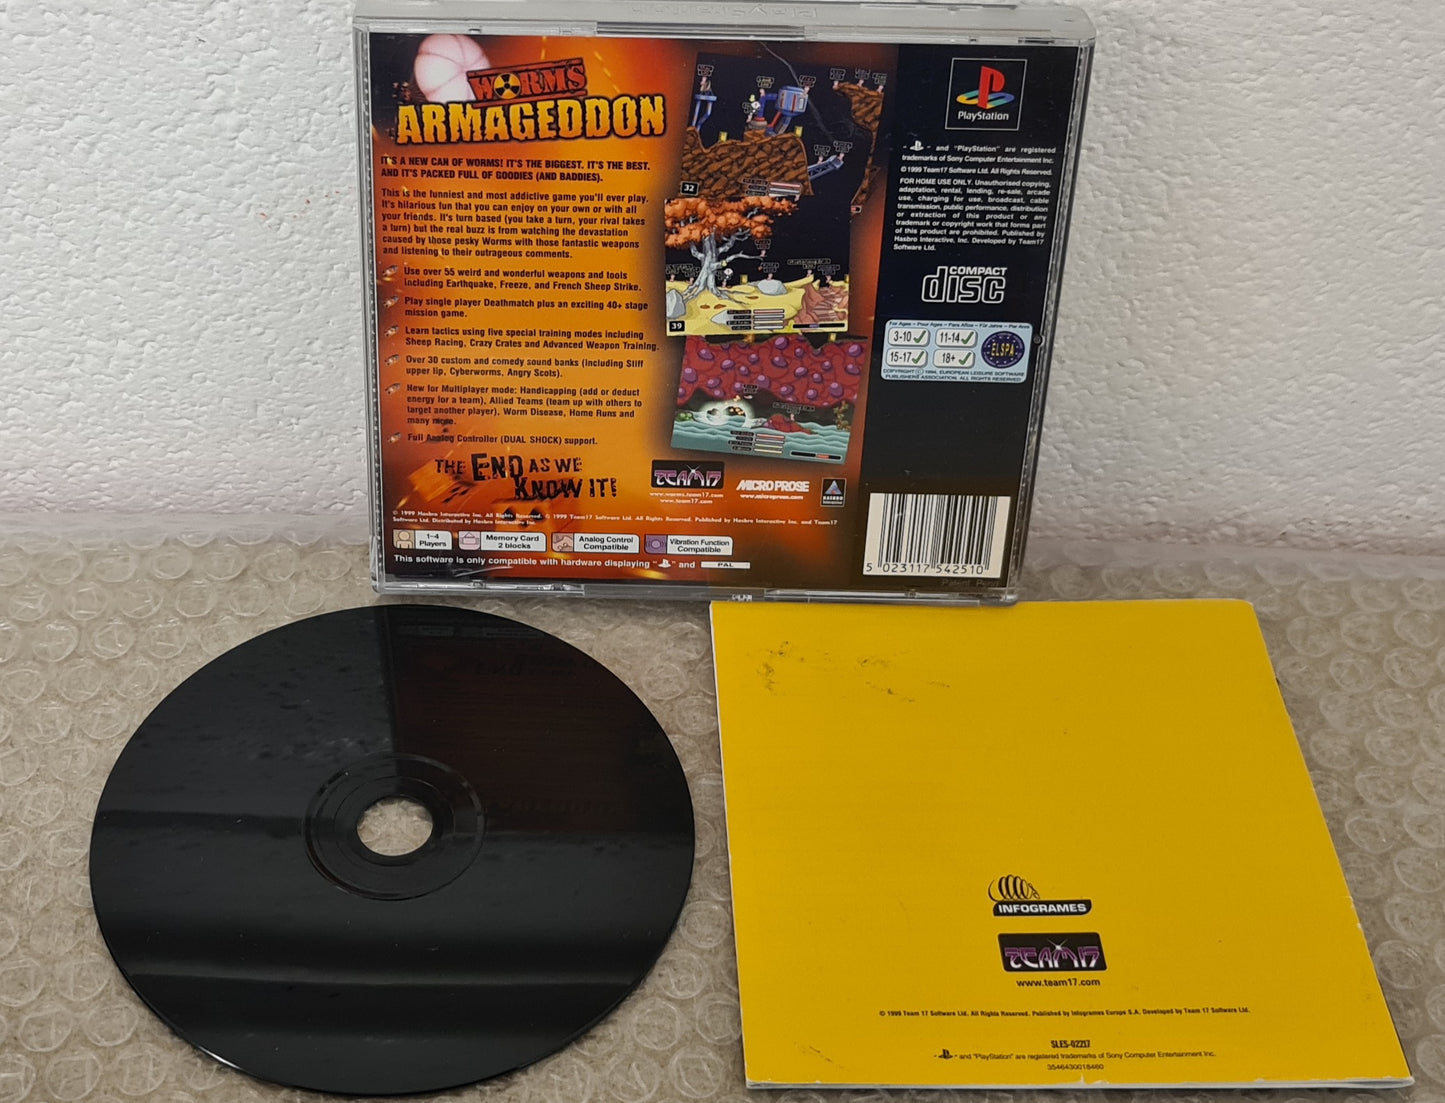 Worms Armageddon Best of Infograms PS1 (Sony Playstation 1) Game